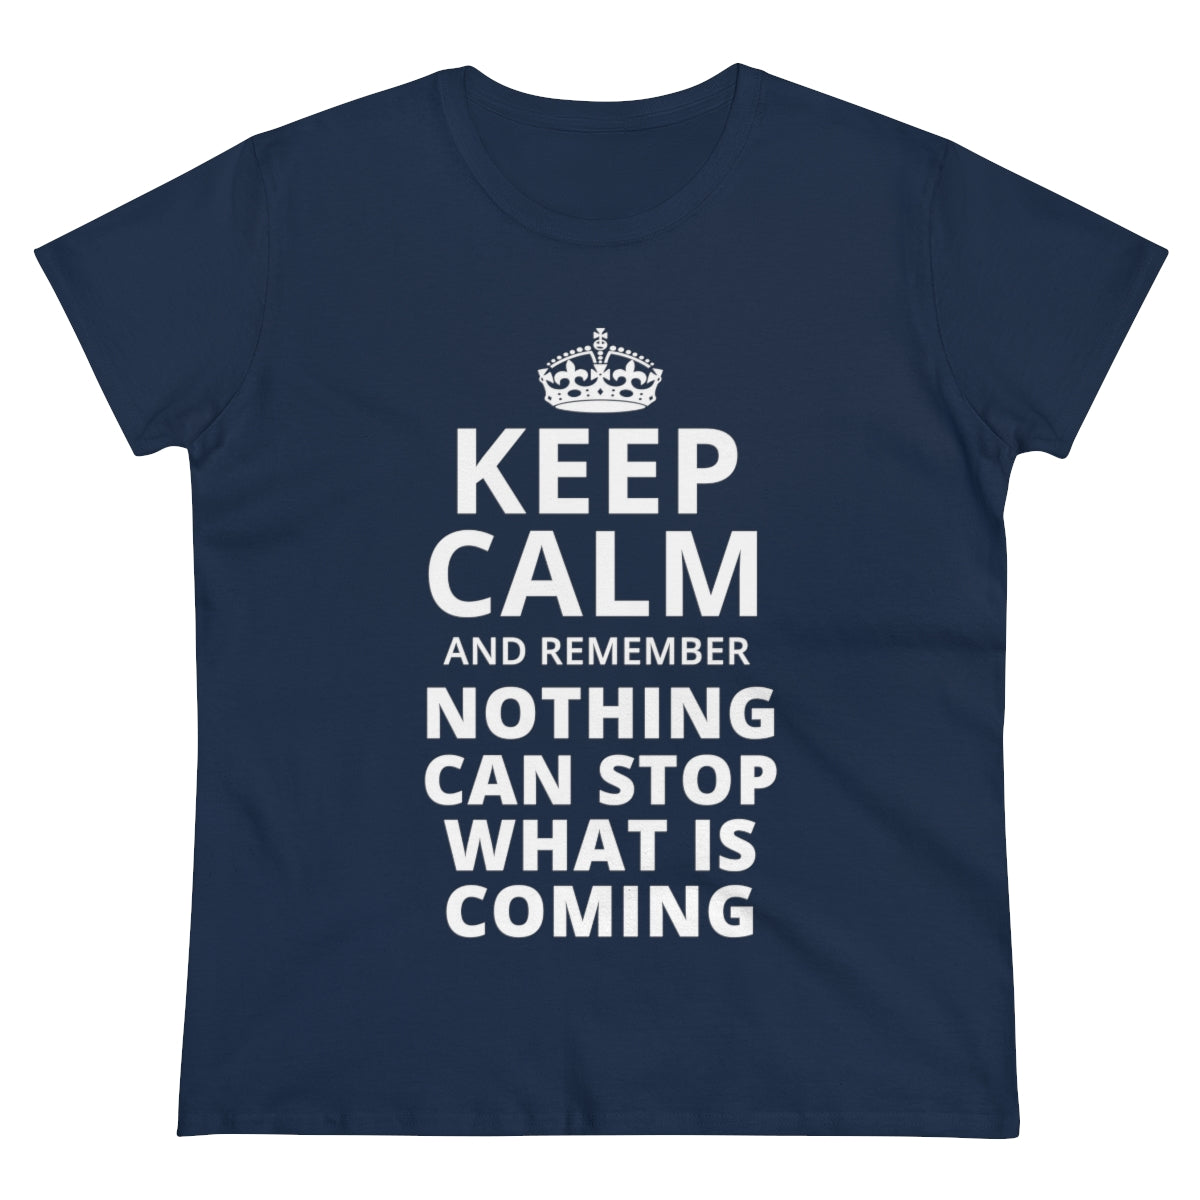 Keep Calm And Remember... | Women's Tee - Rise of The New Media